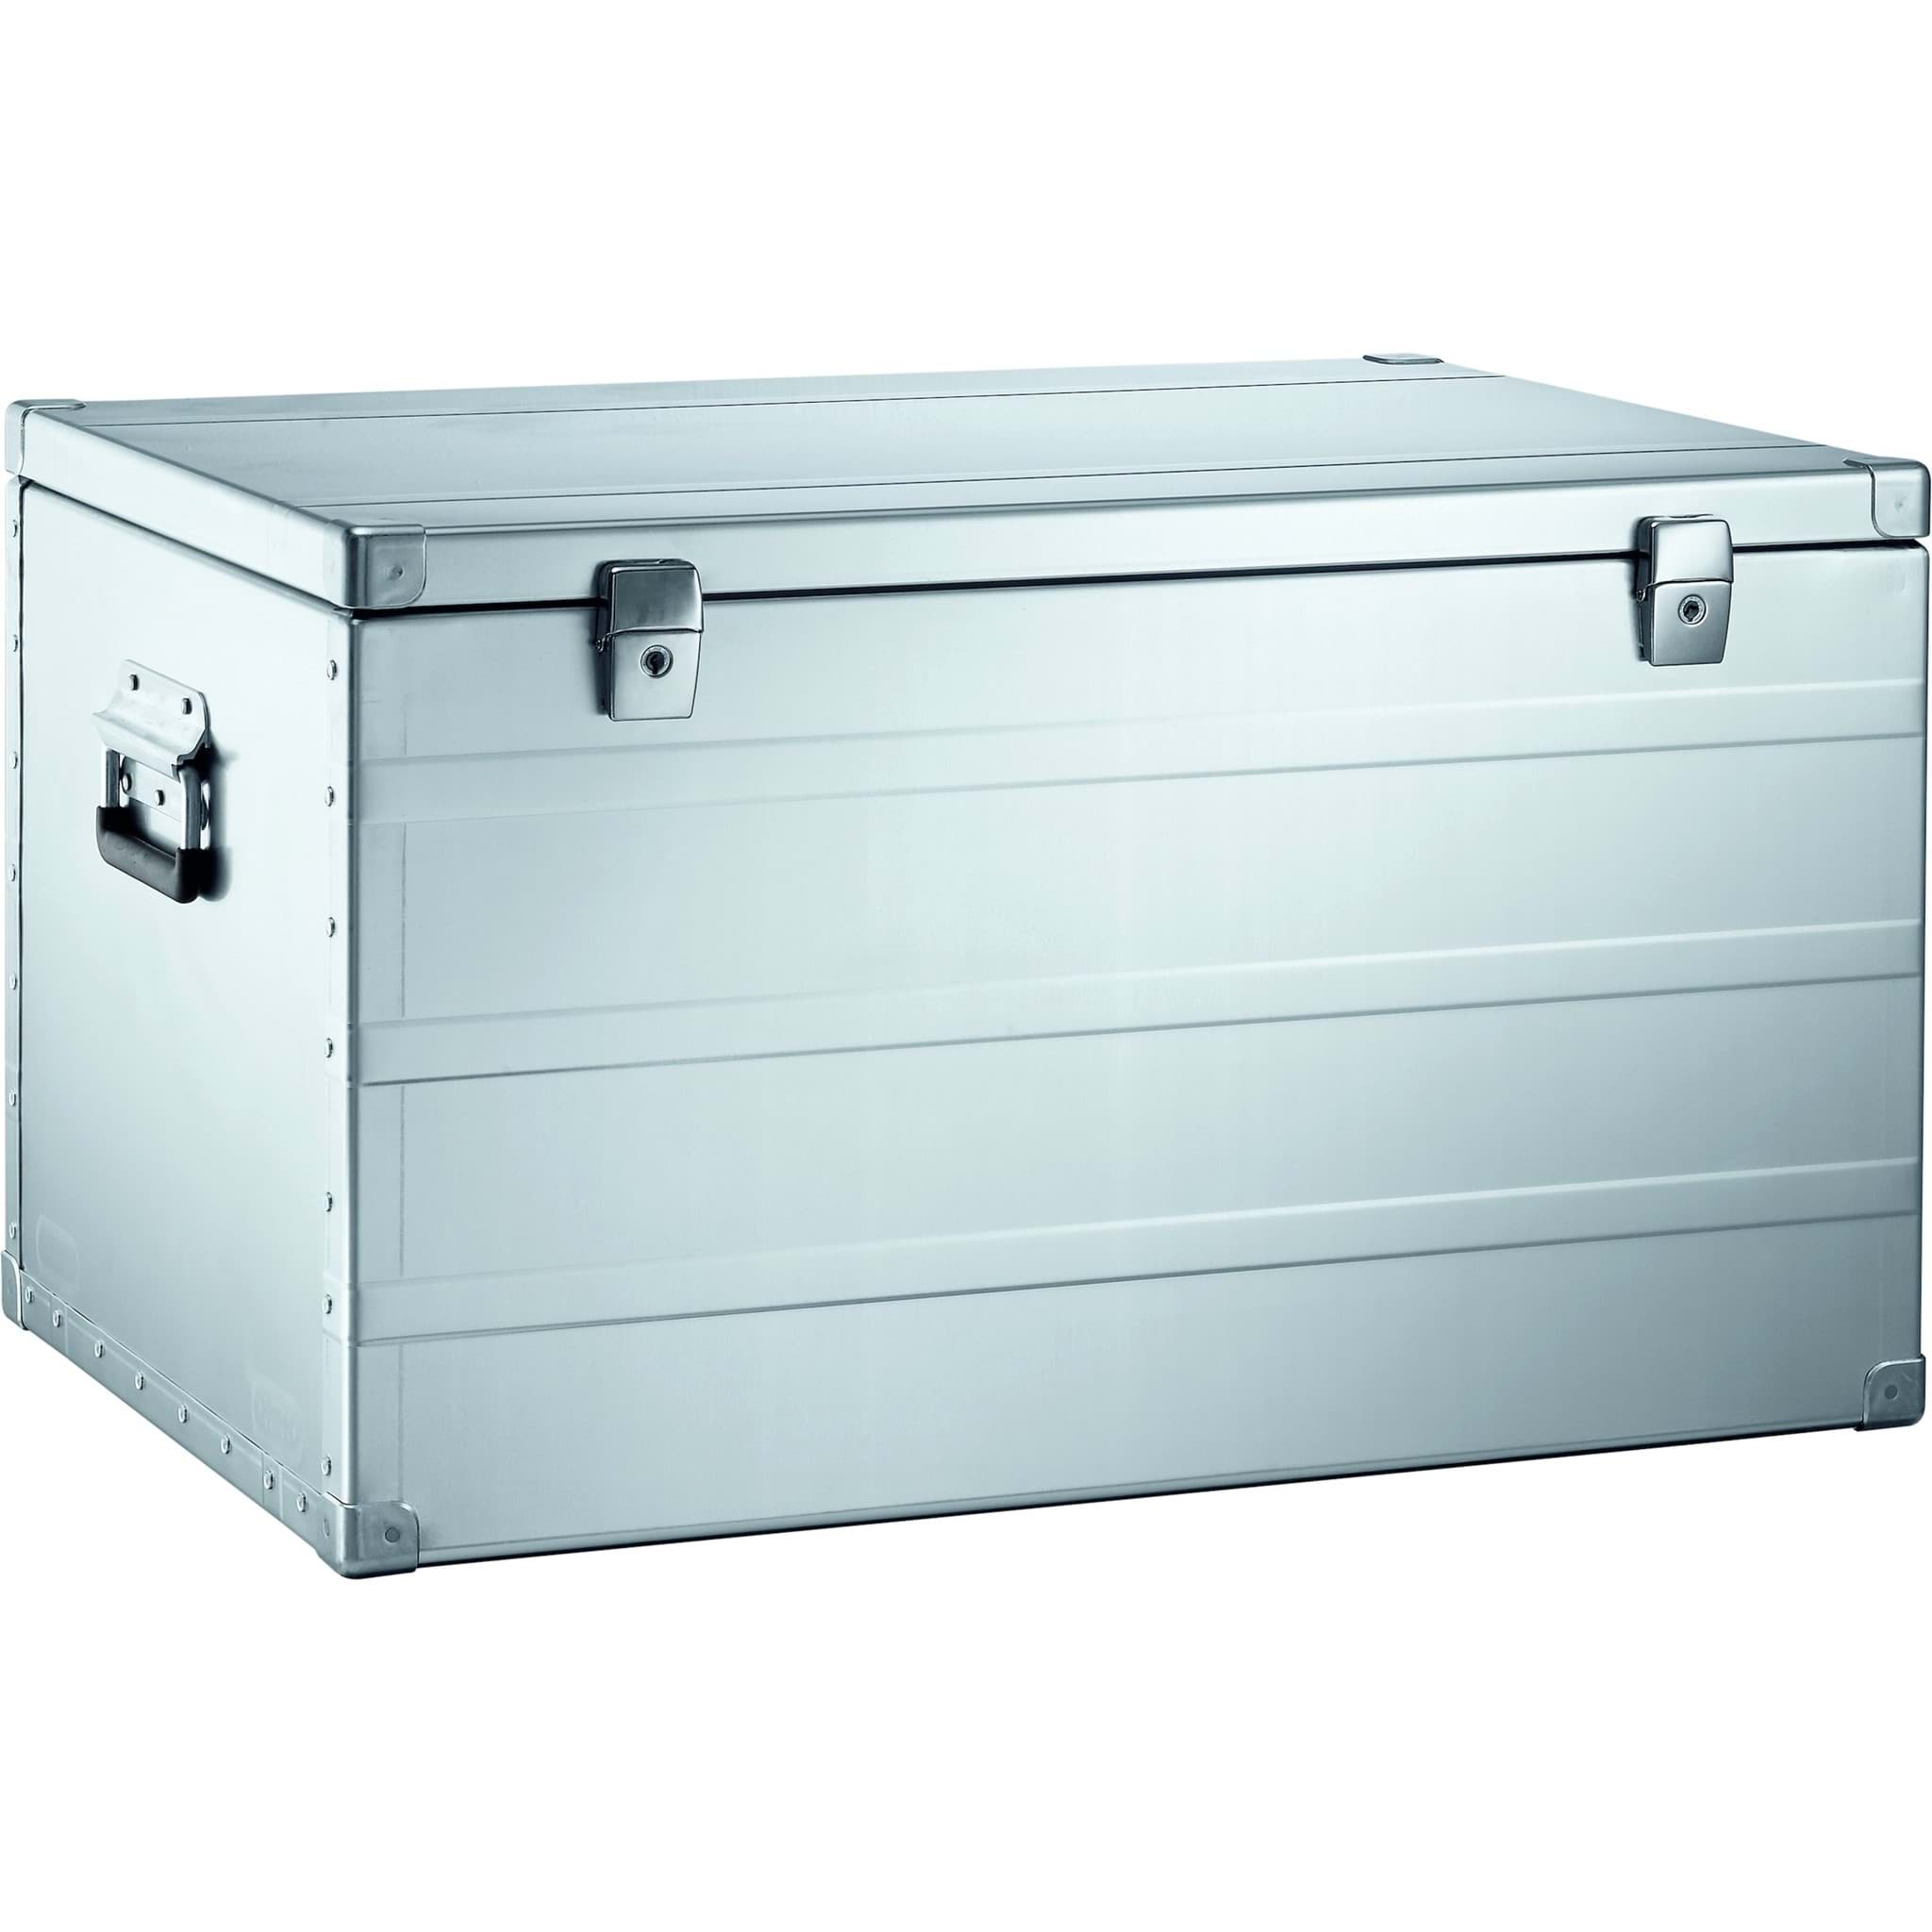 Picture for category Alu-Transportbox K 405